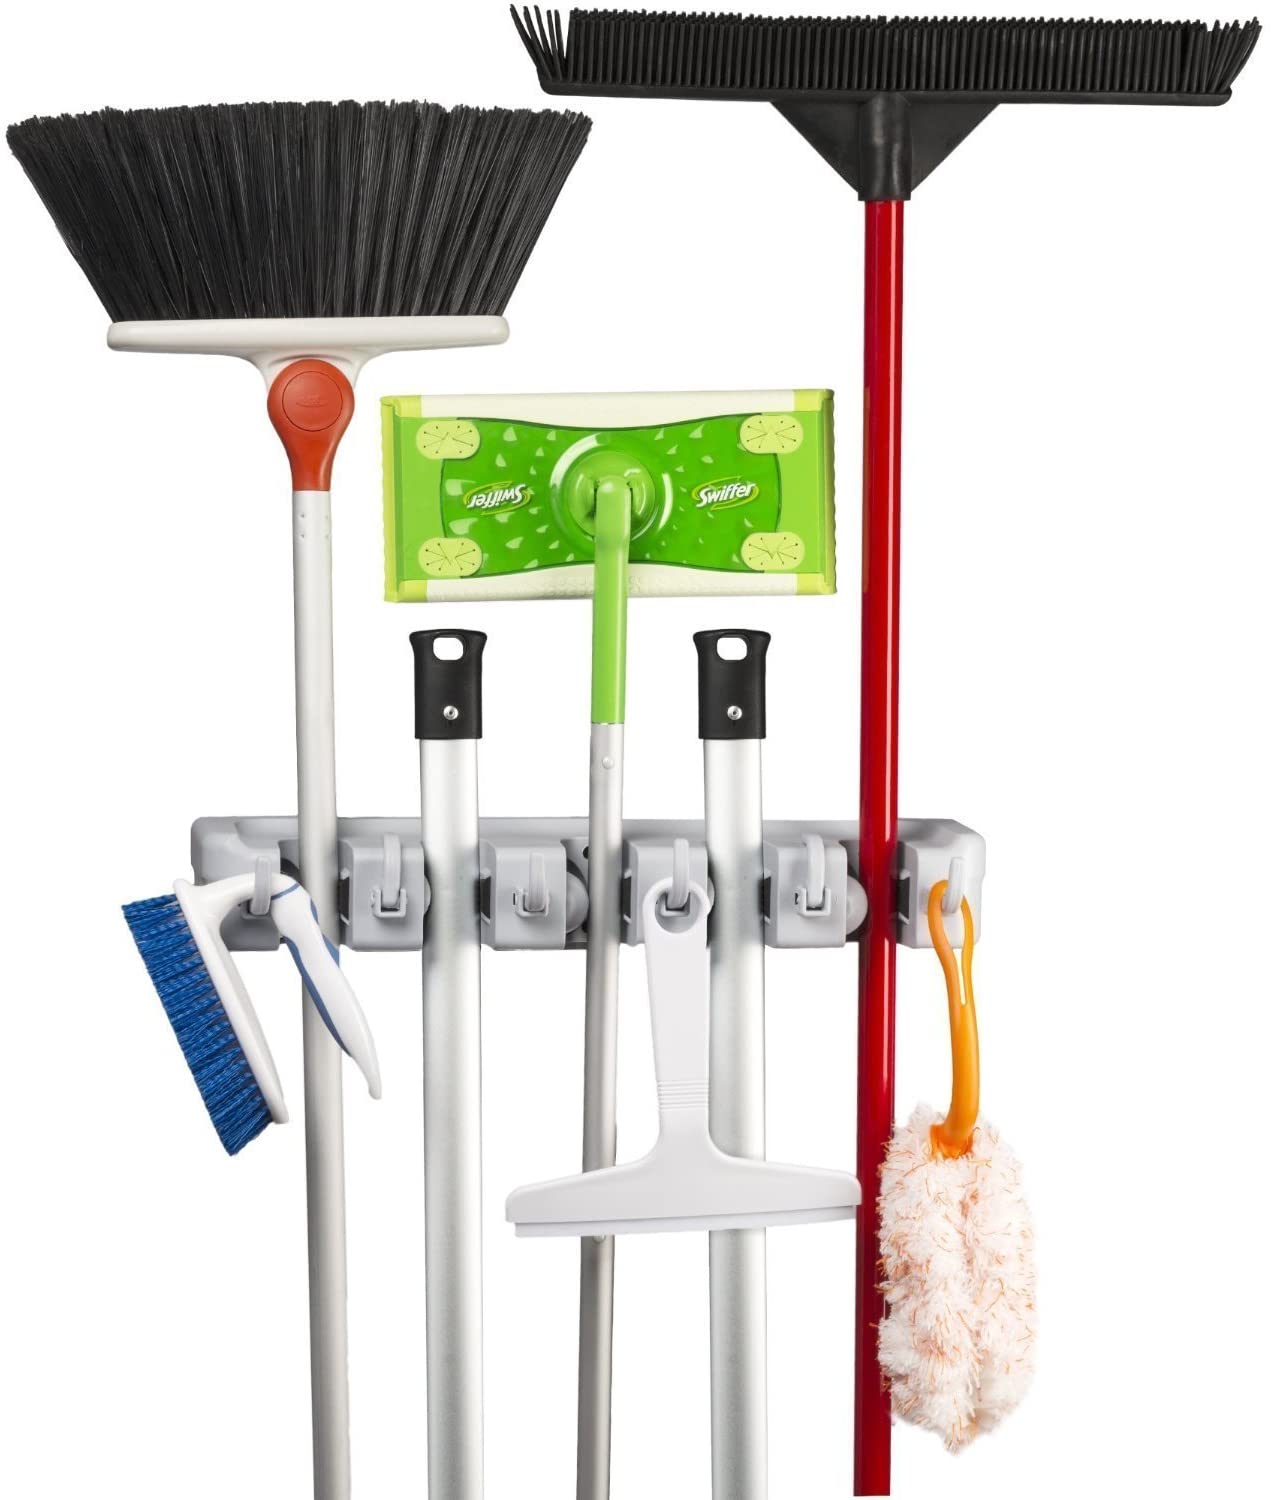 Broom and Mop Holder